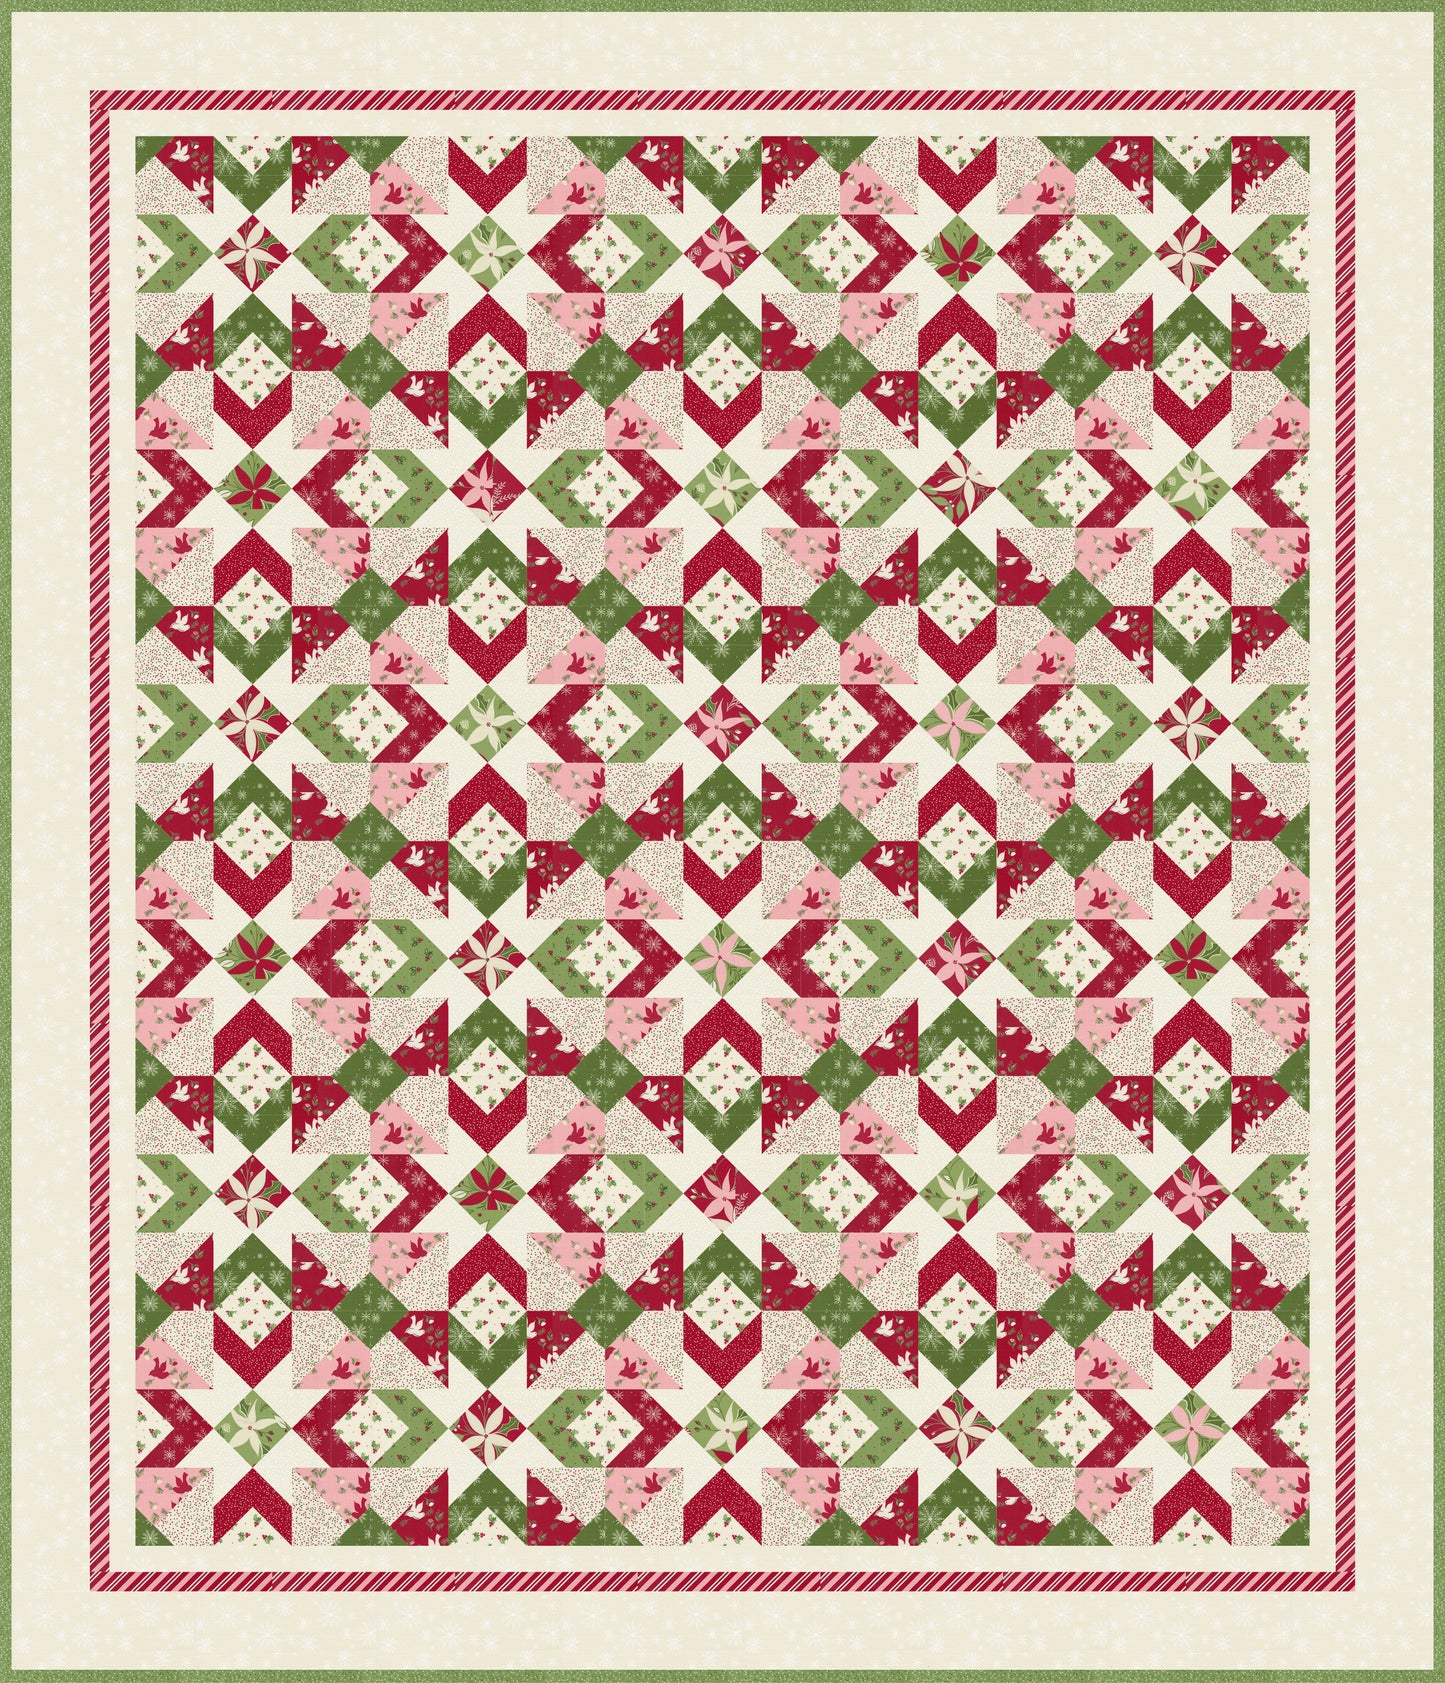 NEW! Once Upon a Christmas "Holly Garland" Quilt Pattern (Downloadable PDF)